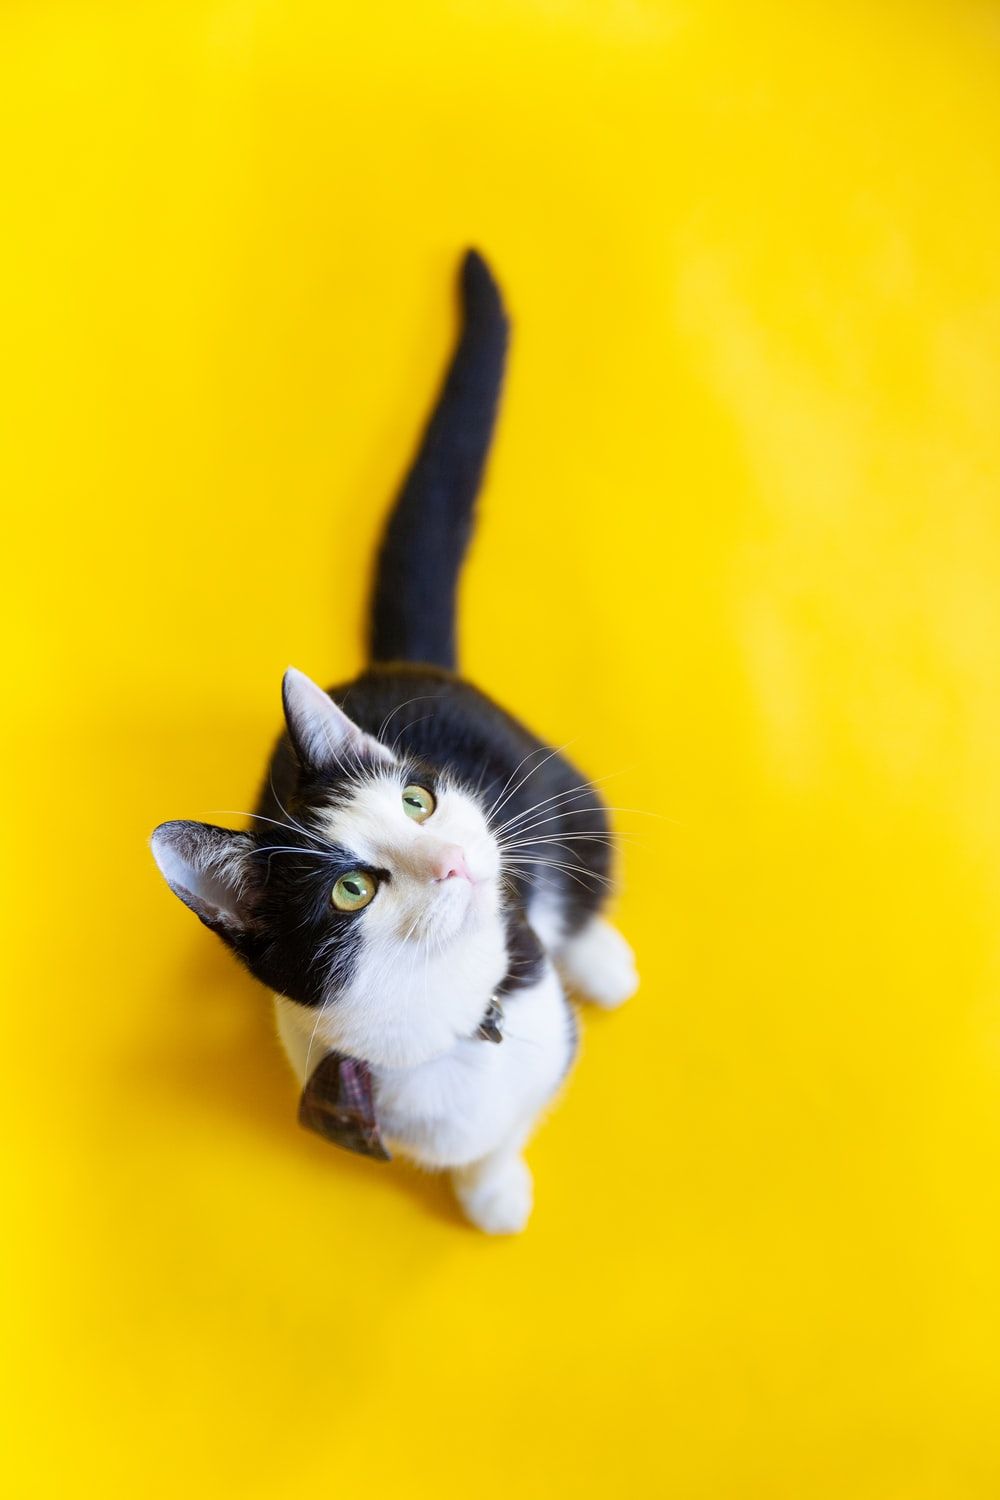 Free download Aesthetic Cat Picture Download Free Image on [1000x1500] for your Desktop, Mobile & Tablet. Explore Yellow Aesthetic Cat Wallpaper. Aesthetic Wallpaper, Emo Aesthetic Wallpaper, Goth Aesthetic Wallpaper